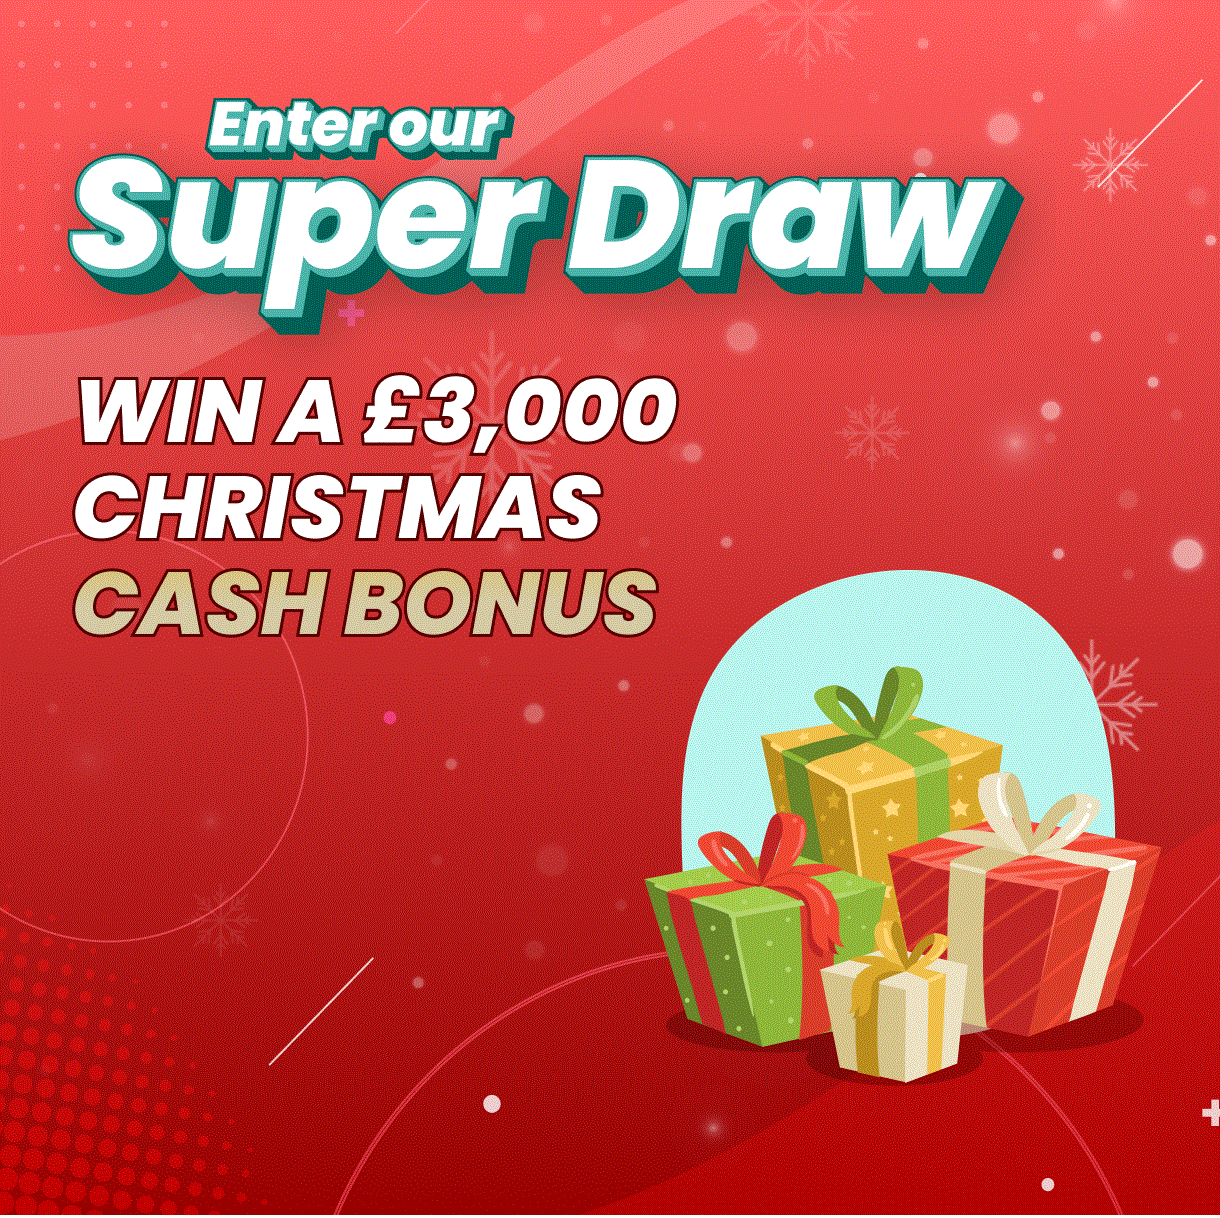 £3,000 cash Christmas super draw lottery prize